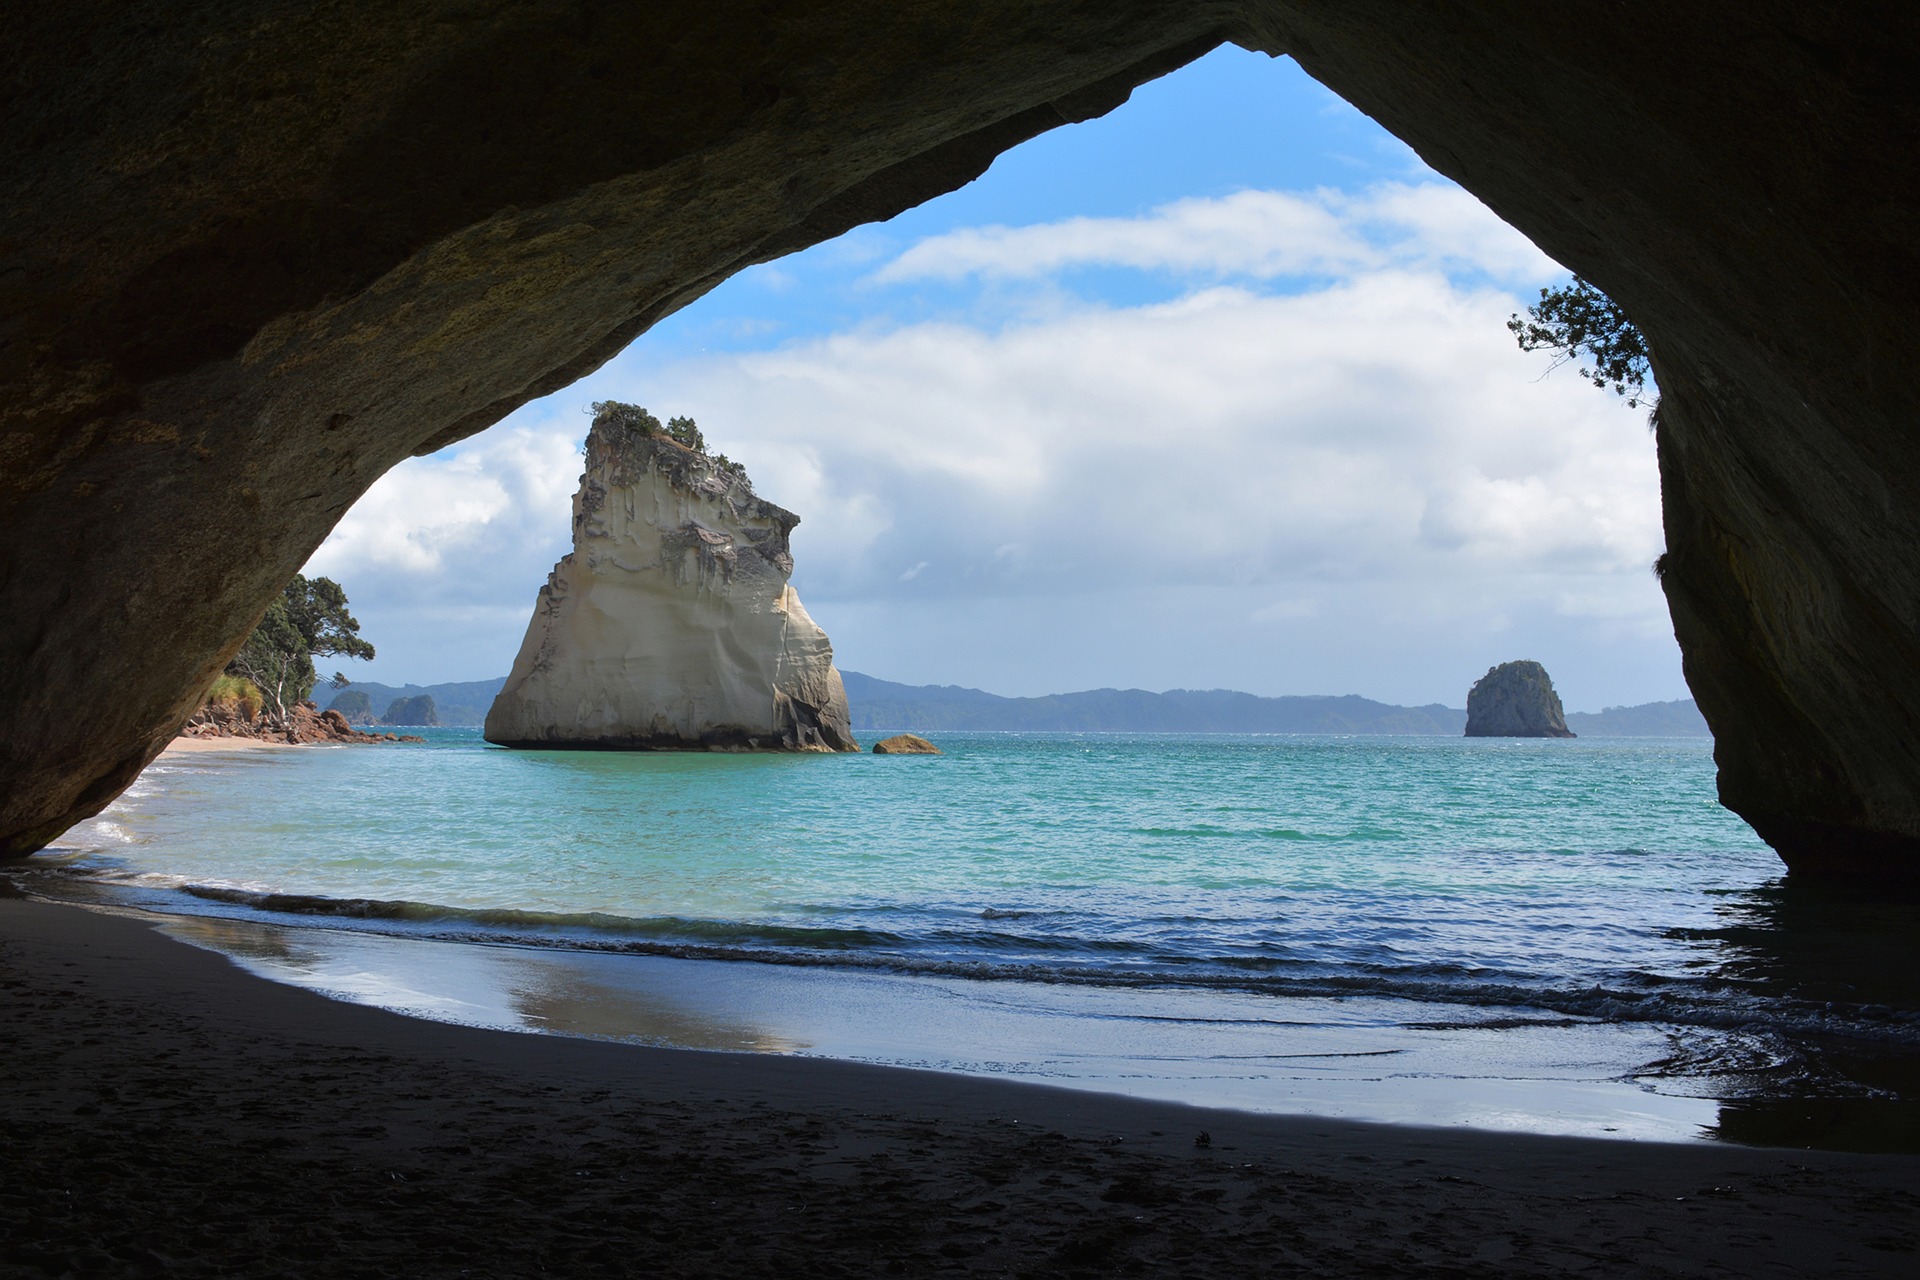 cathedral-cove-1592274_1920.jpg